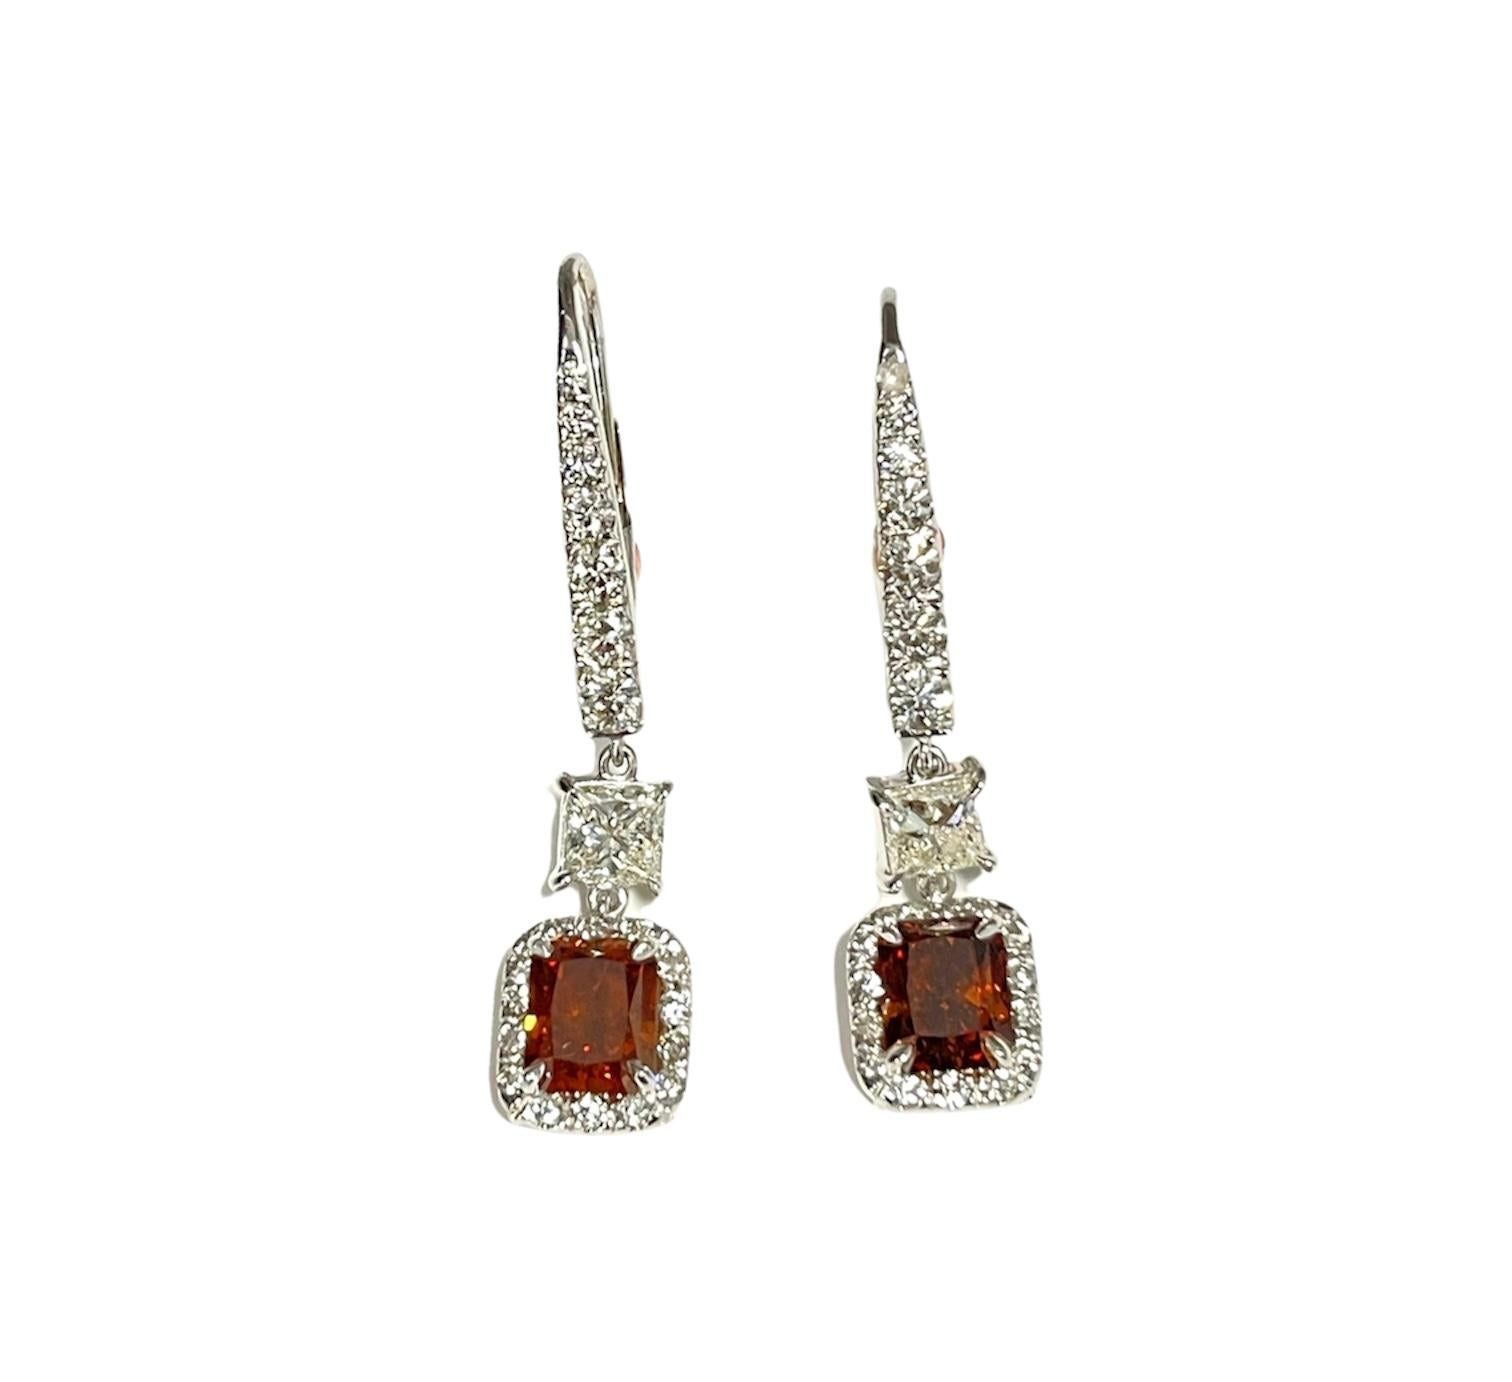 These stunning natural fancy deep orange-brown diamond earrings feature 2 natural GIA diamonds weighing 2.02 ct and 50 diamonds weighing 1.21 ct set in 18k white gold.